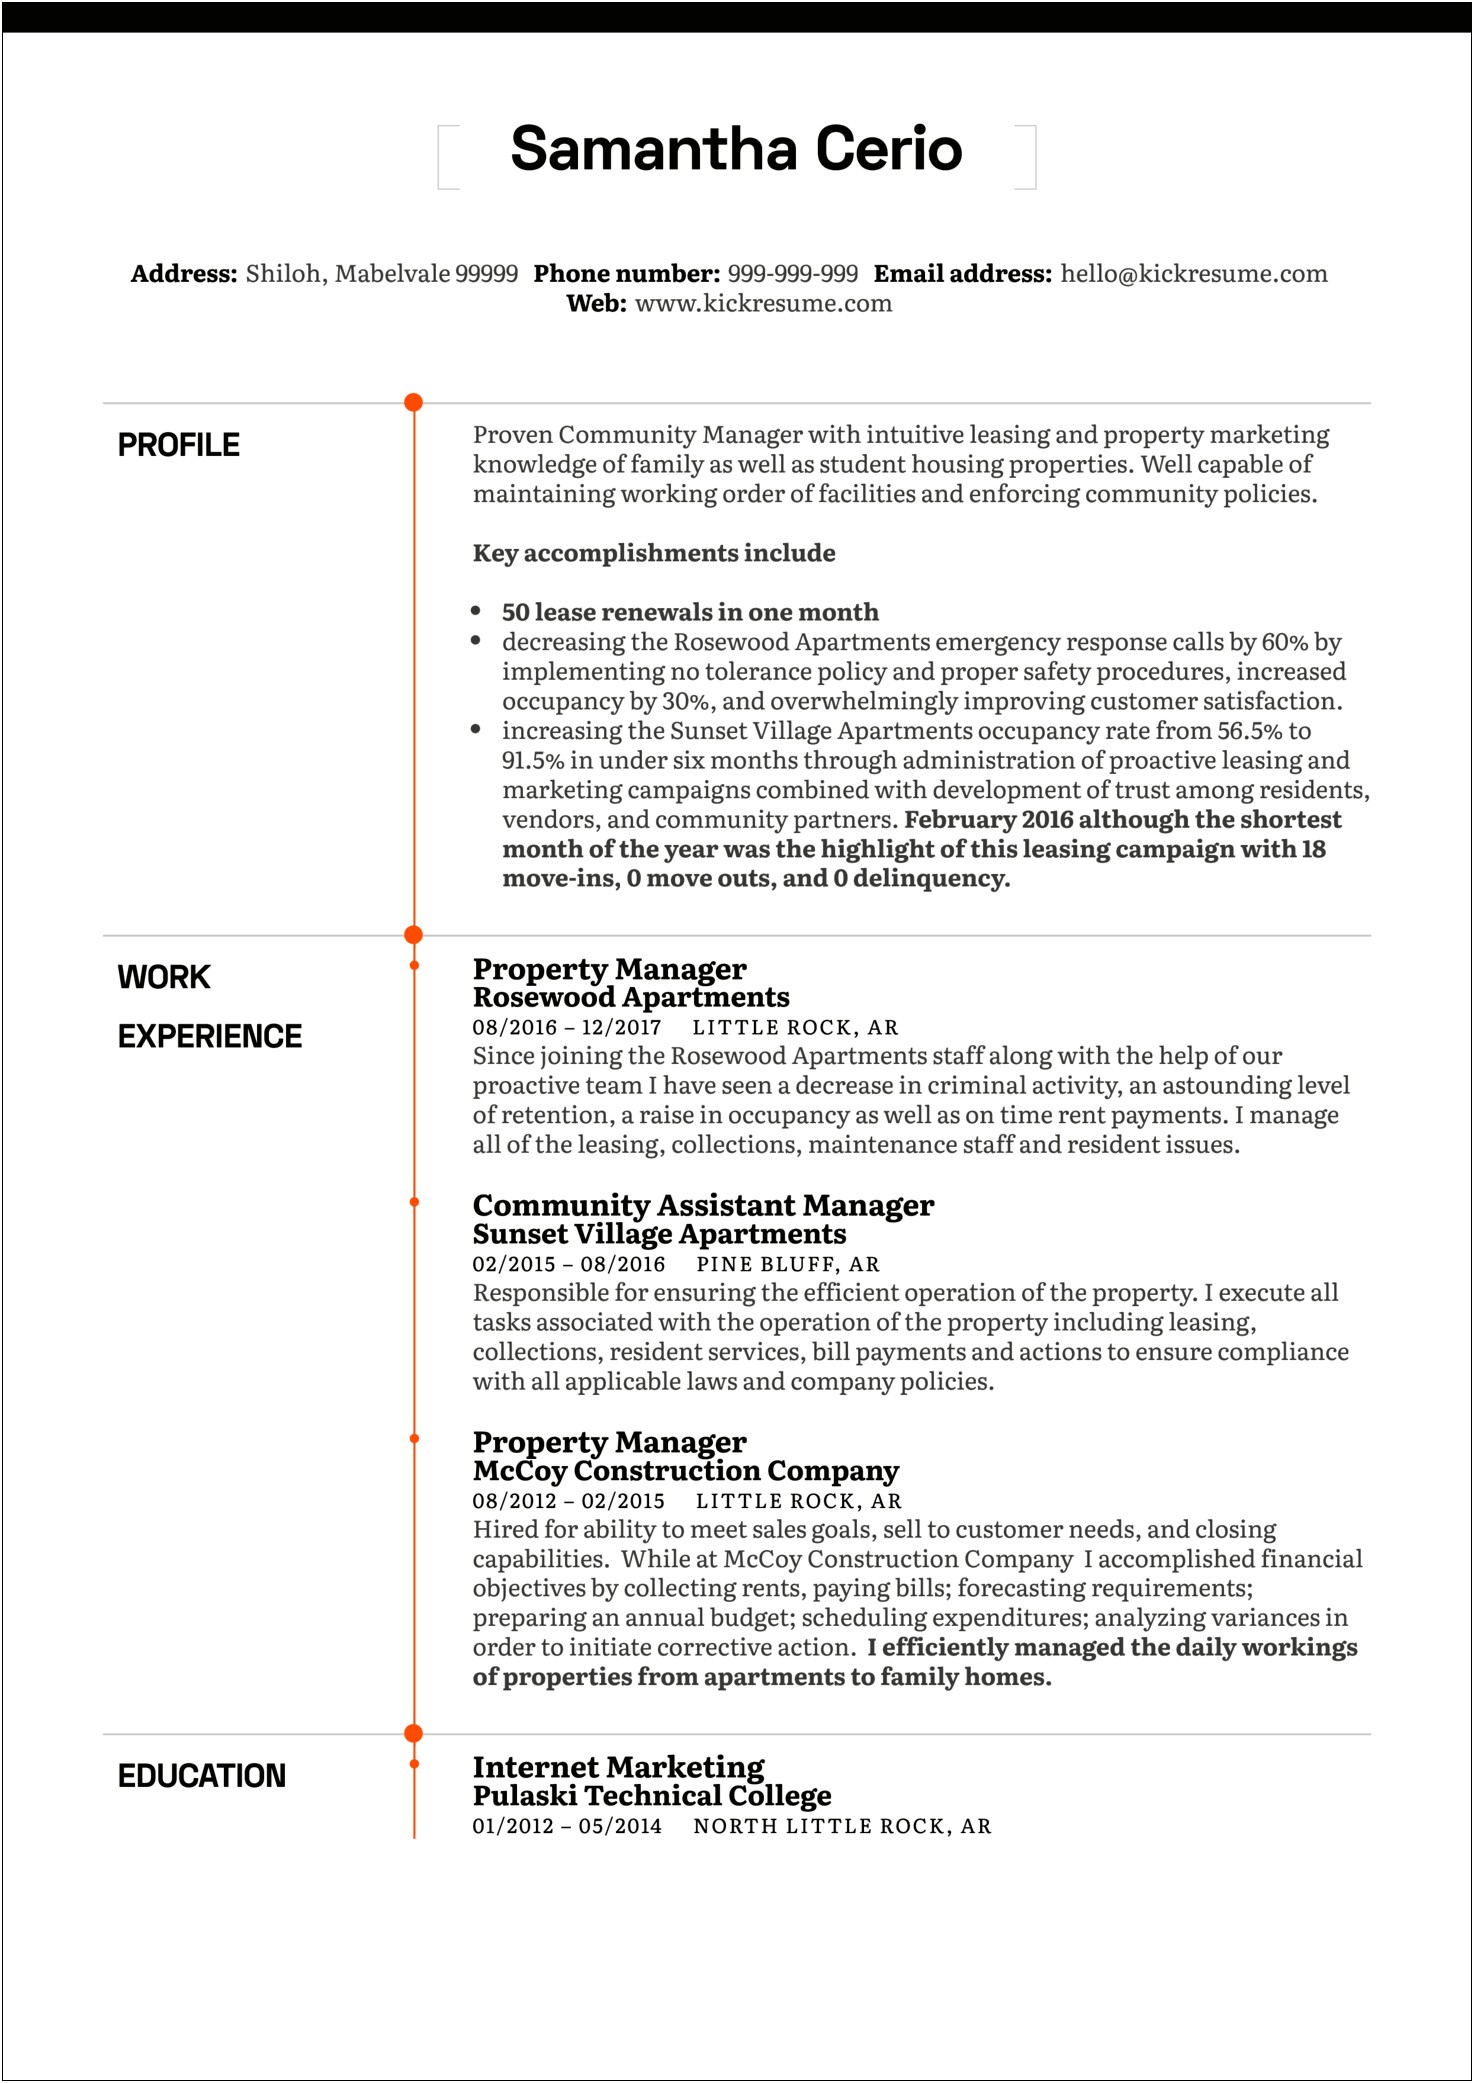 Resume For Property Manager No Experience